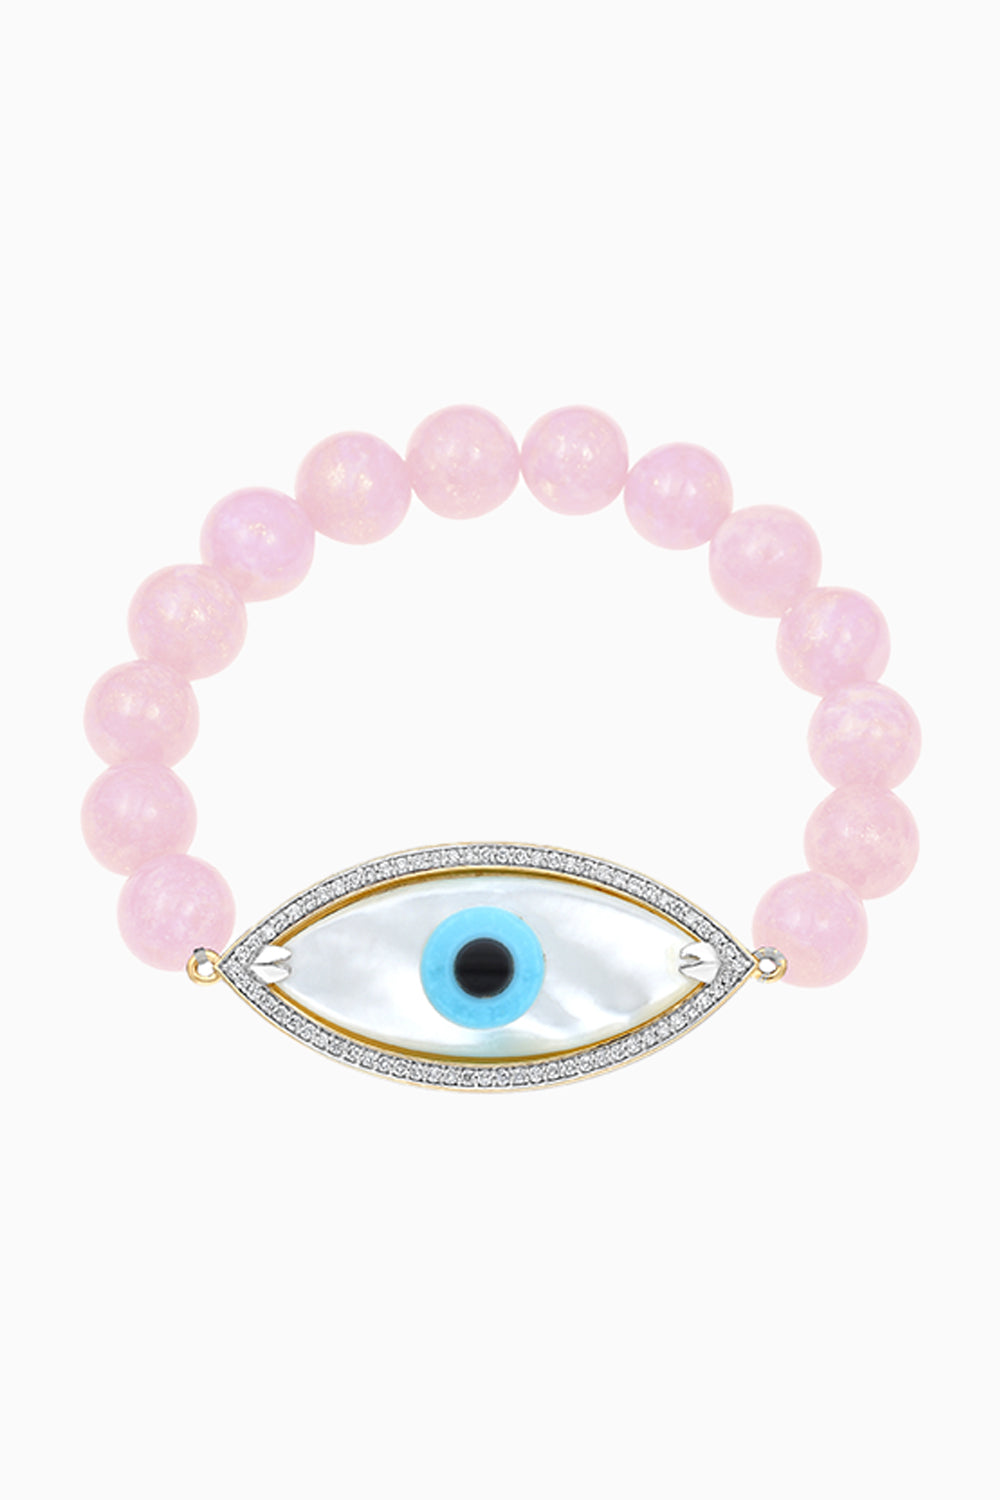 Gold Large Marquise Evil Eye Diamond Bracelet with Pink Opal Beads